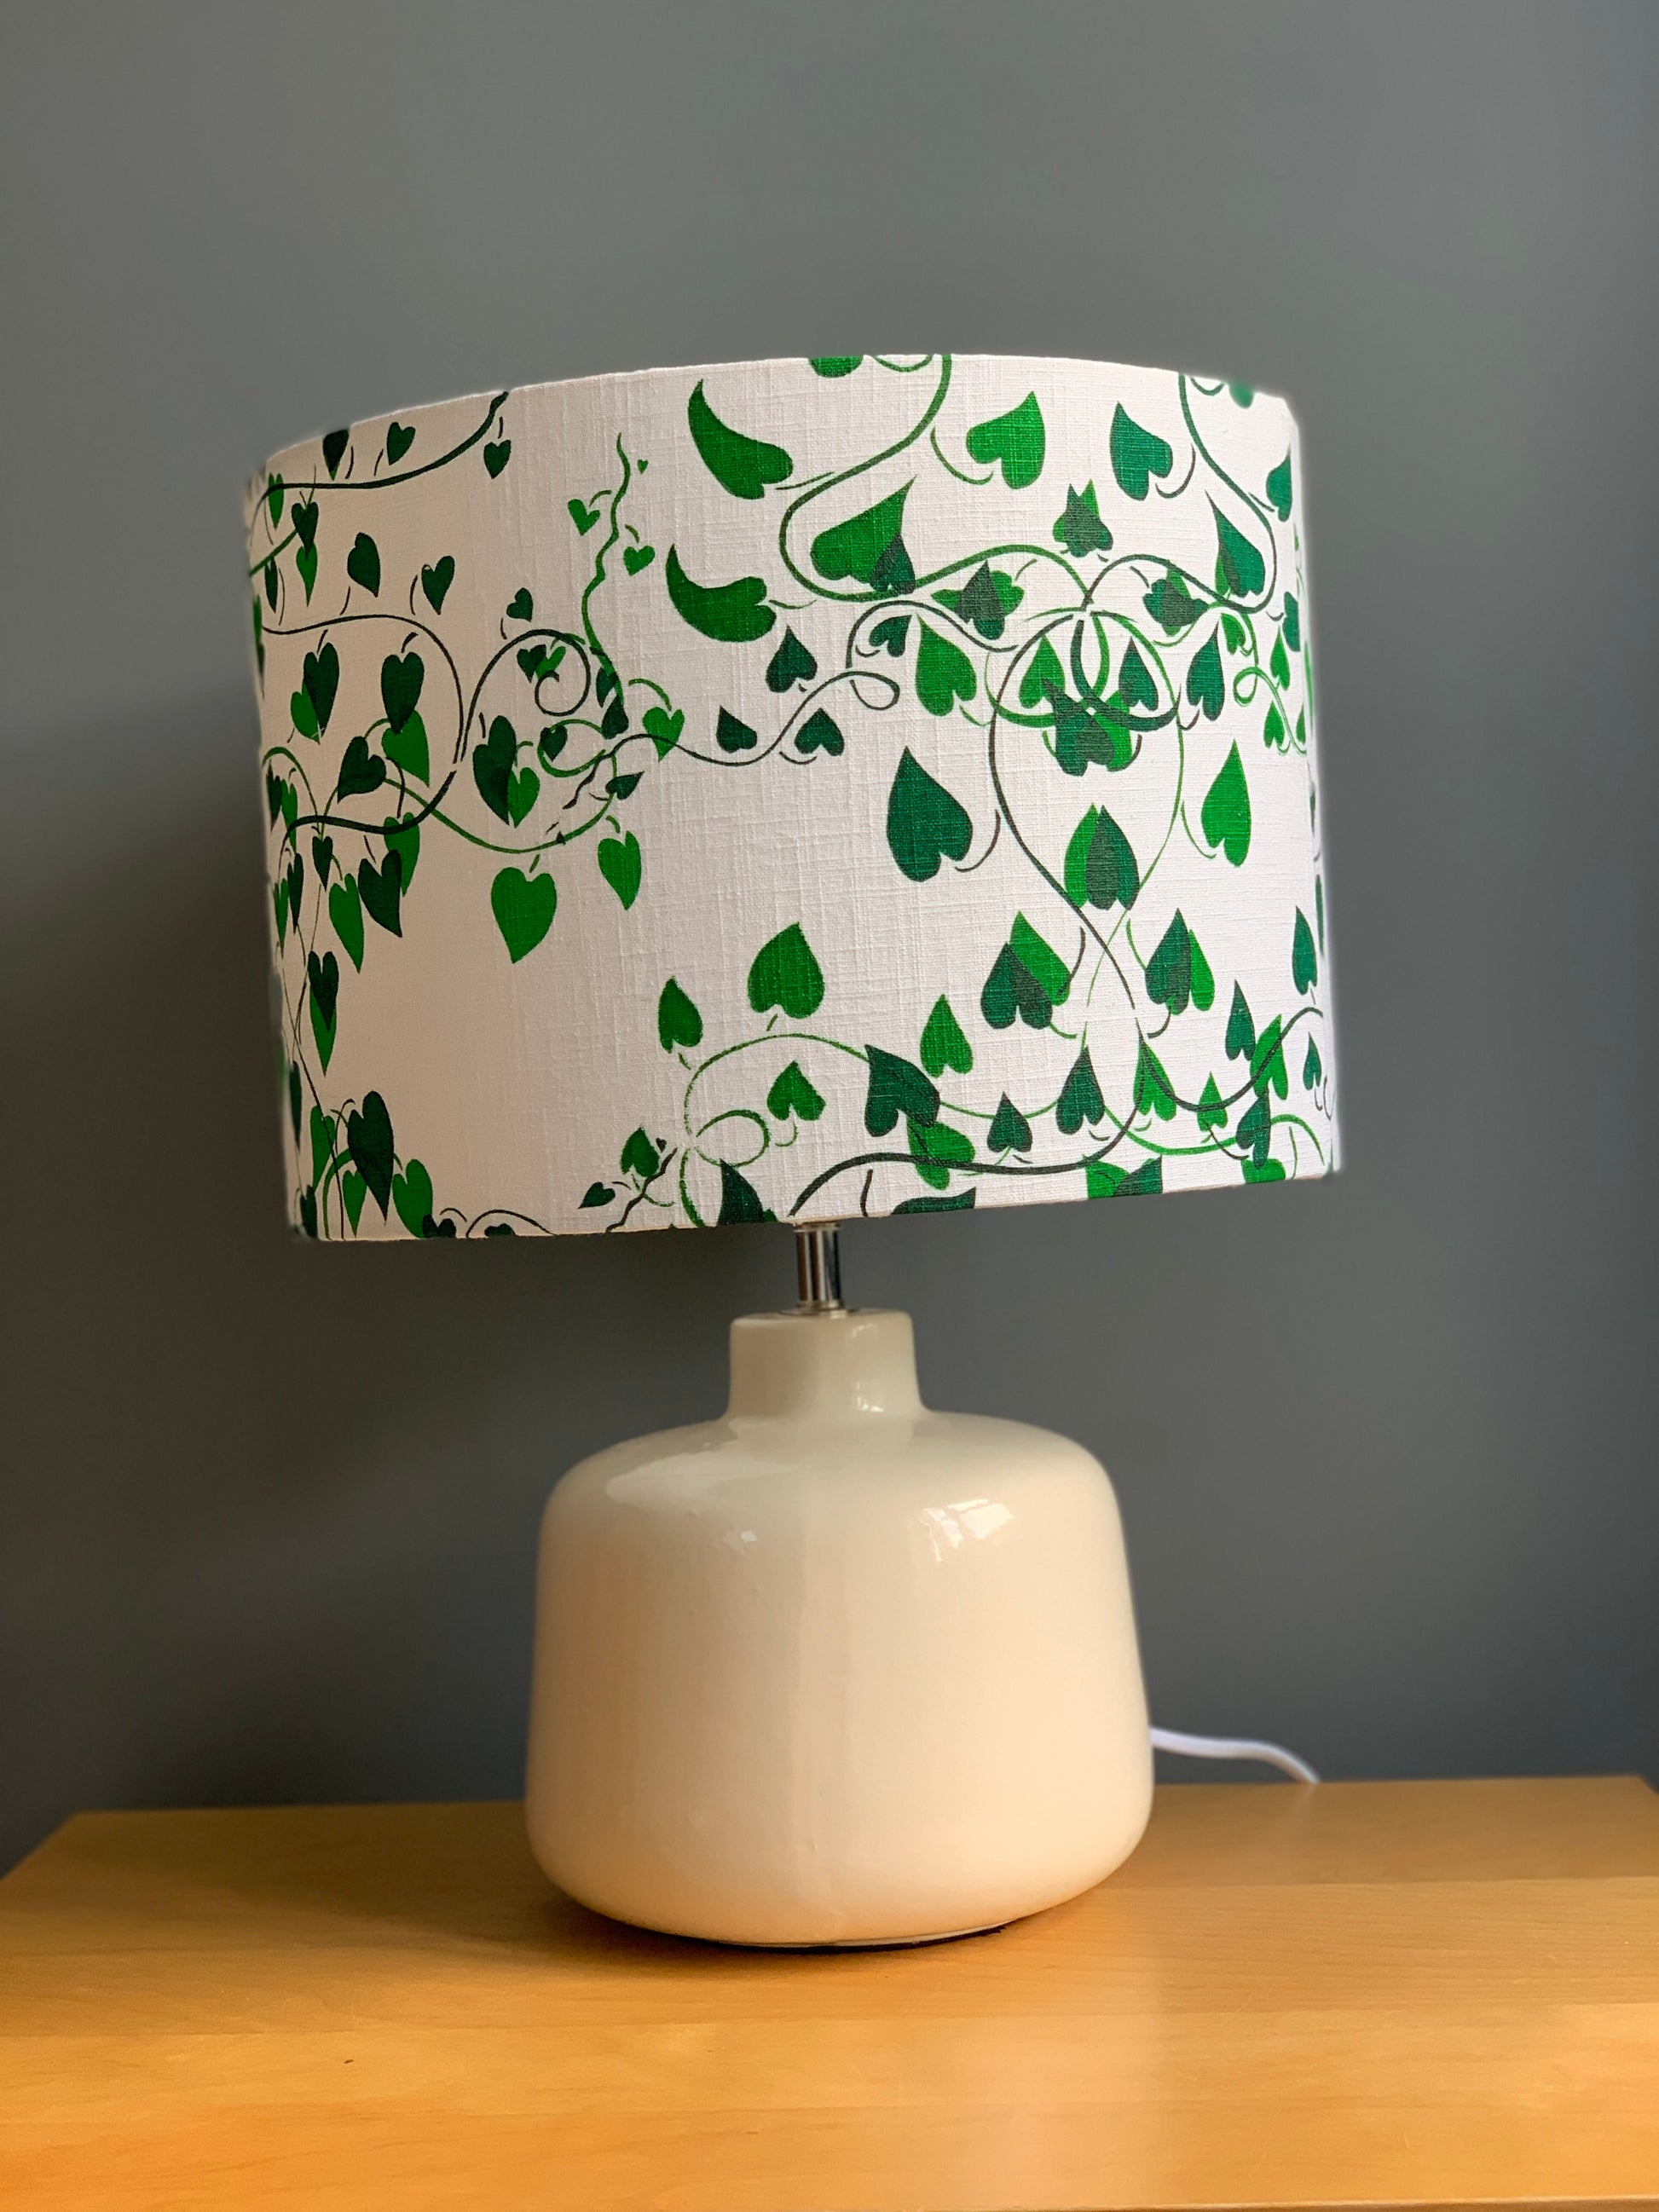 Table lampshade with a white linen background and two shades of green convolvulus vines running over it.